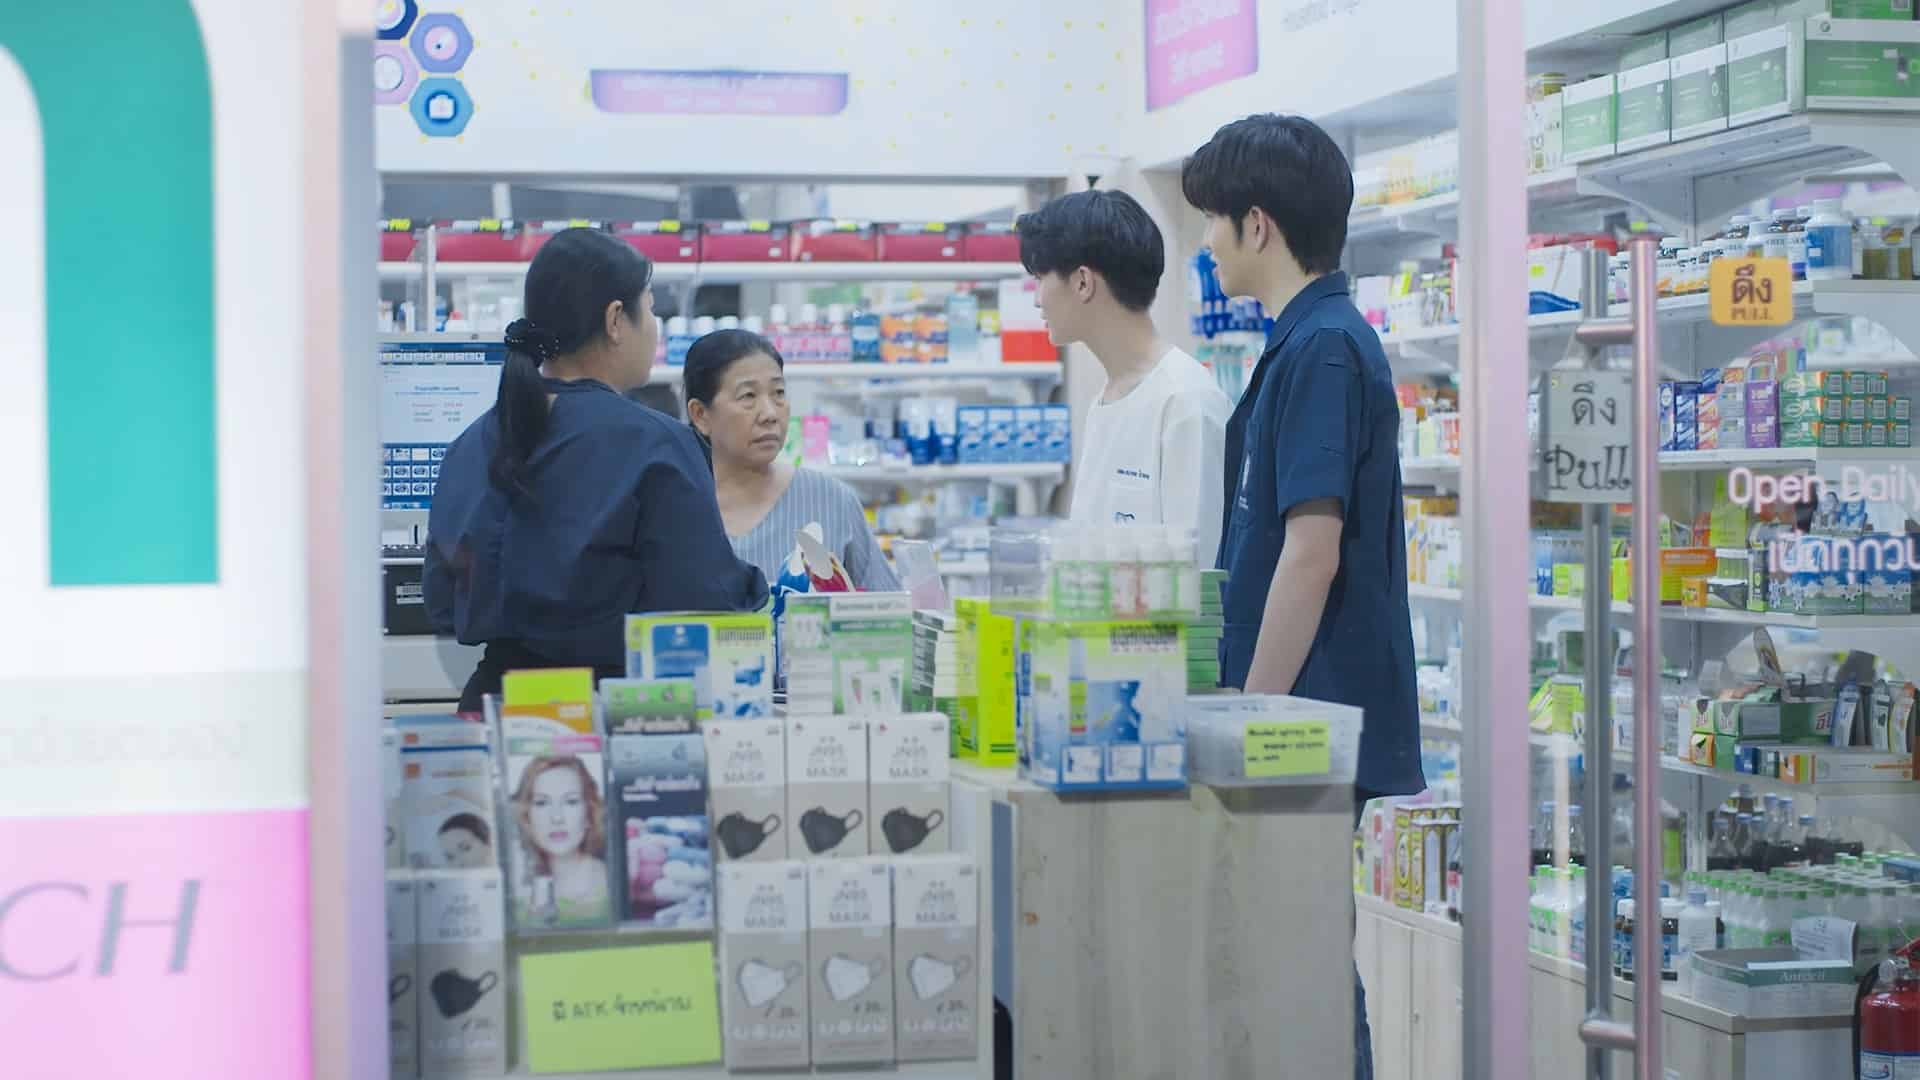 Future: Ana and Fuse visit the pharmacy